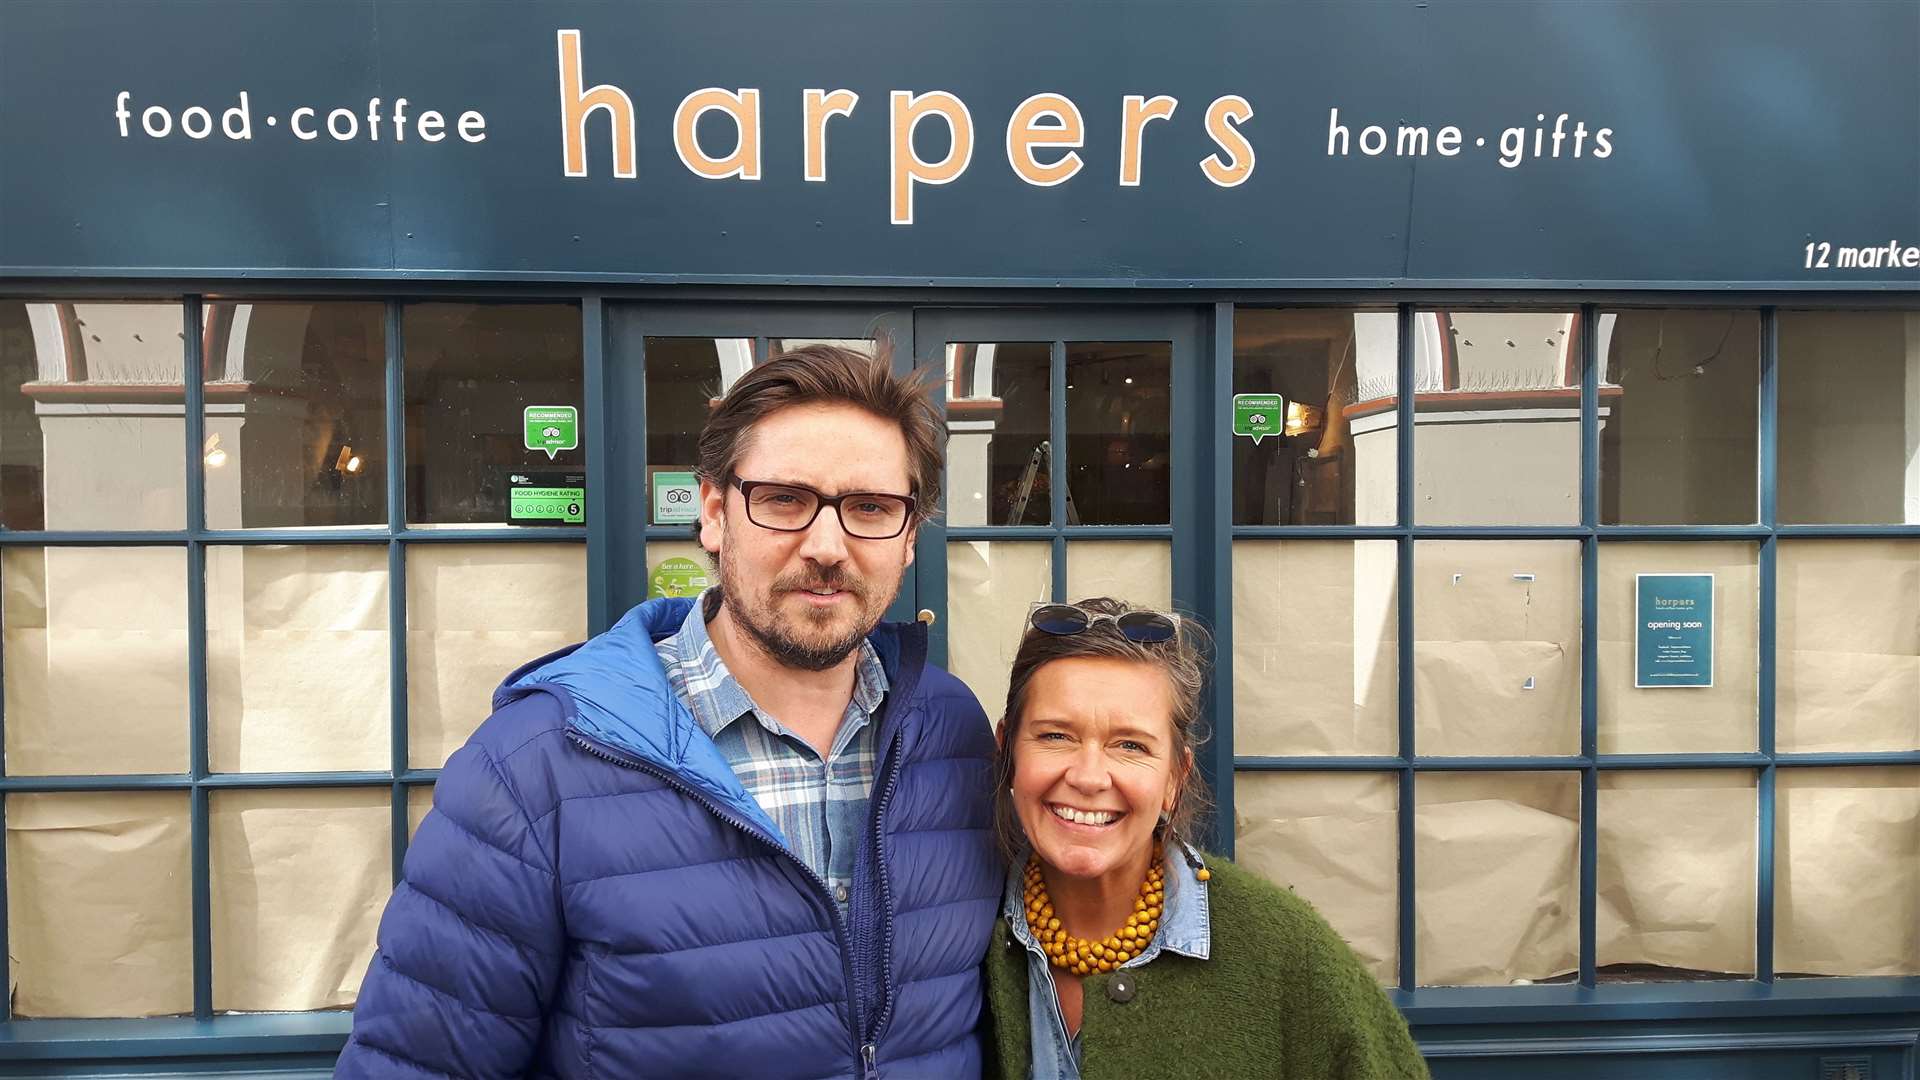 Claudine and Nick Bedford, who owned Harpers